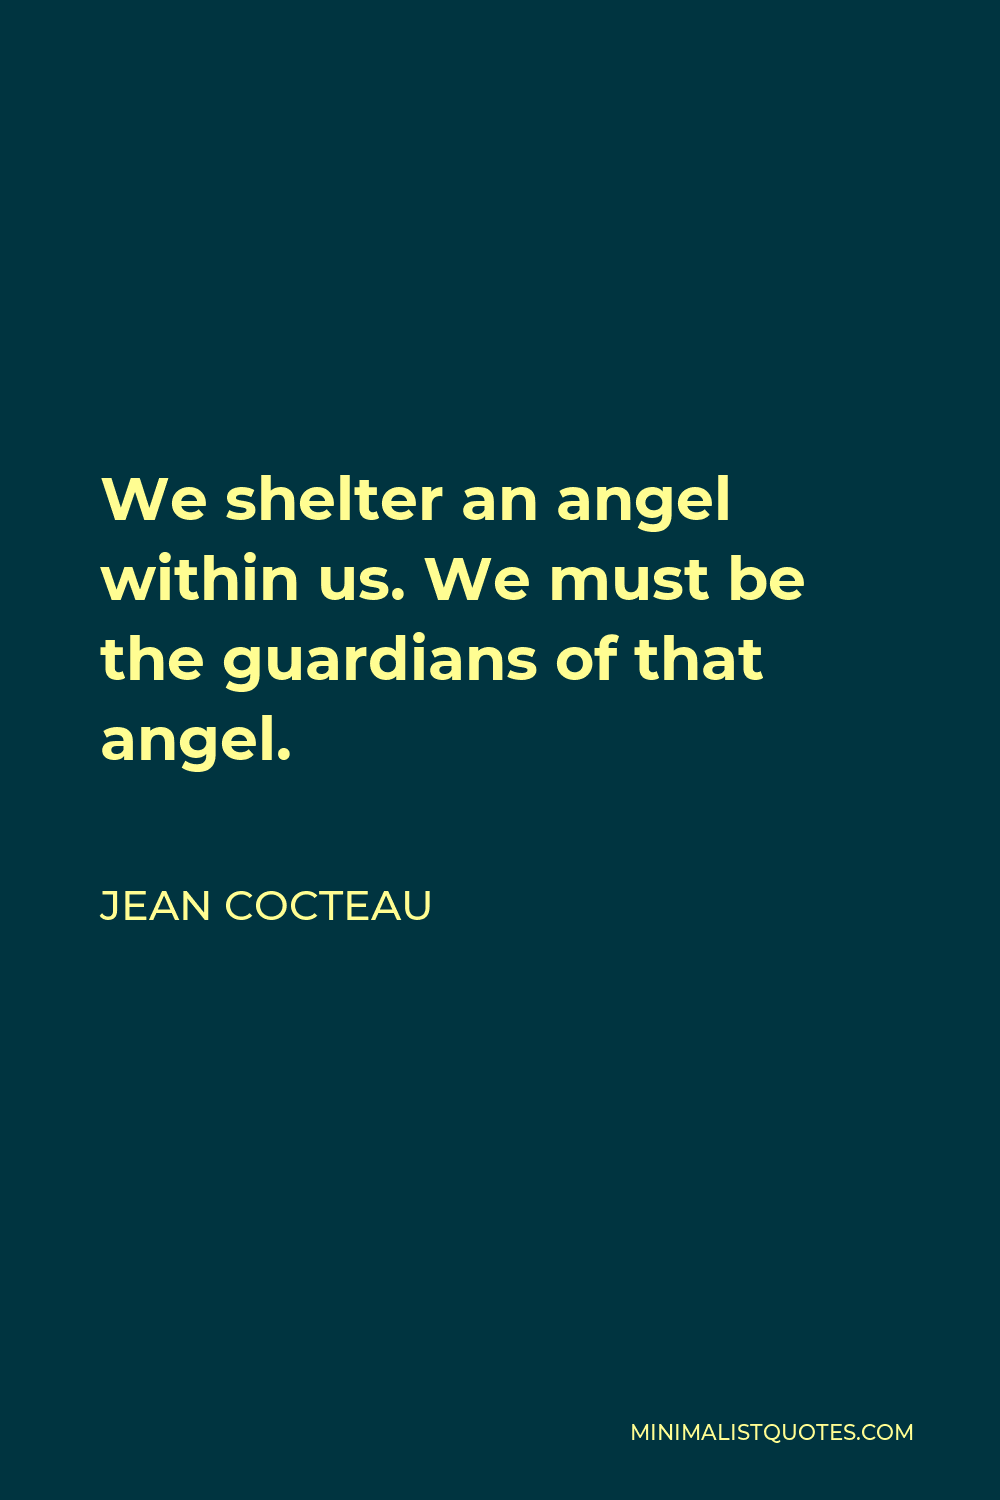 Jean Cocteau Quote - We shelter an angel within us. We must be the guardians of that angel.